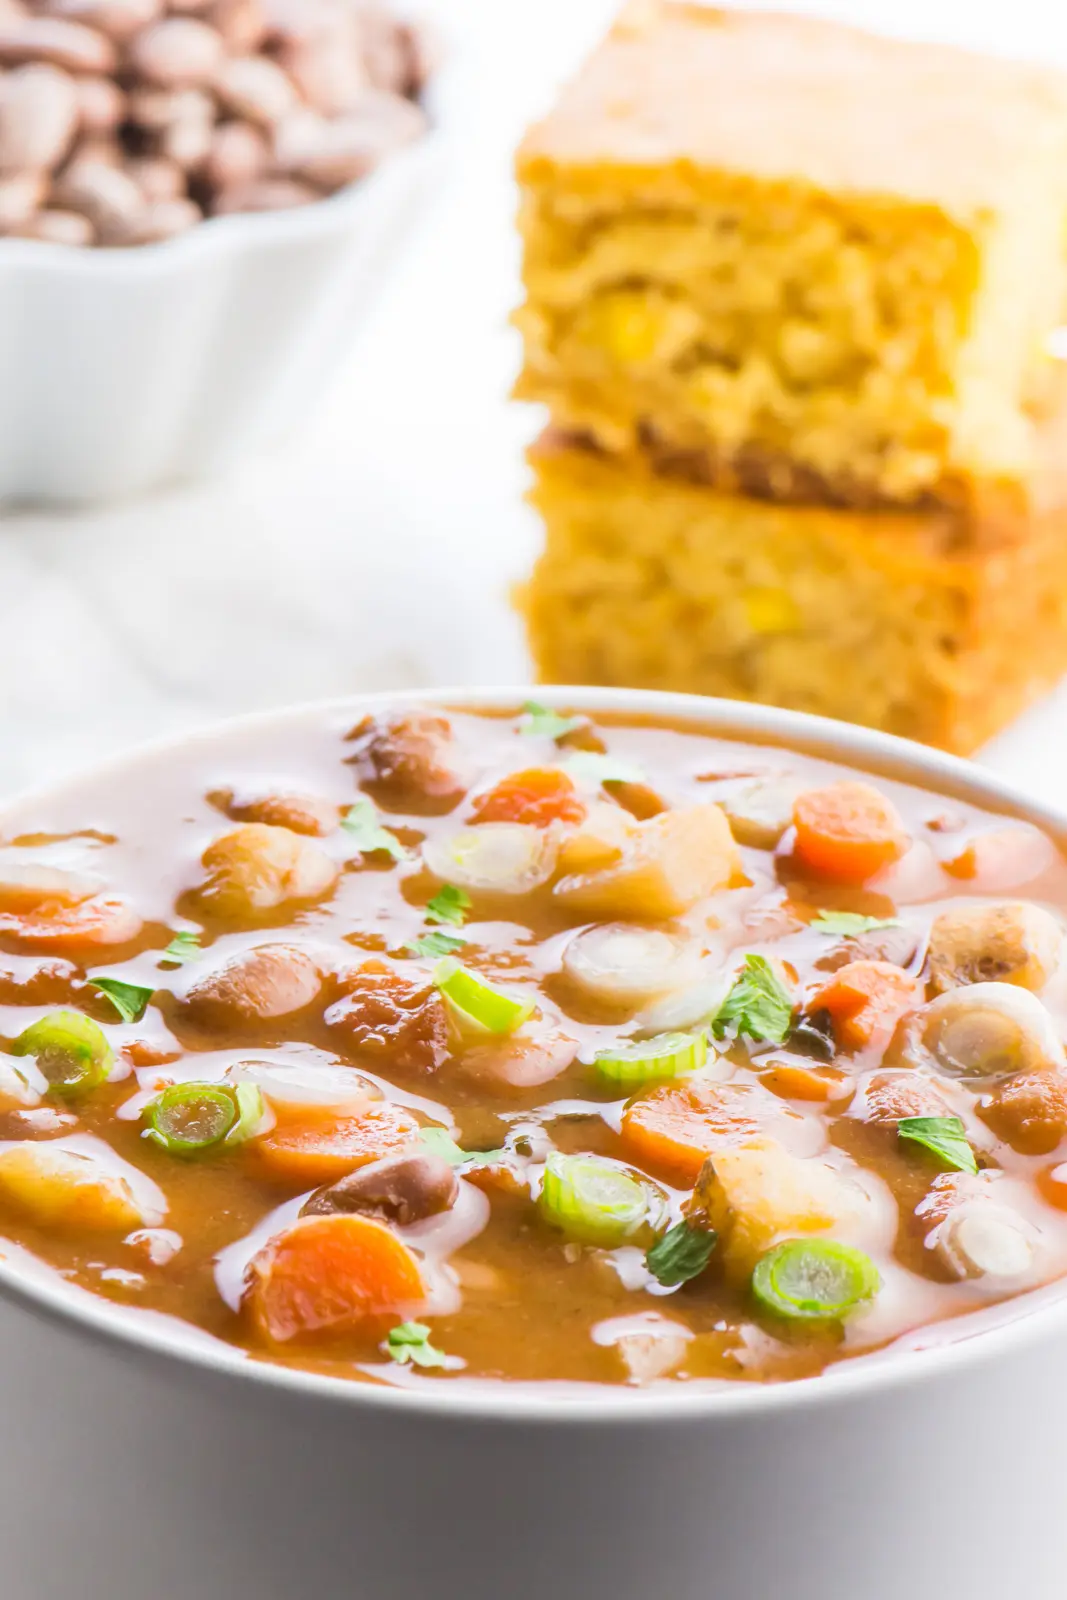 A bowl of pinto bean soup is front in center in this photo. The light is shining on all the ingredients in the bowl, including the slices of carrots, potatoes, and beans. There is a stack of cornbread behind the soup, and a bowl of dried pinto beans behind that.